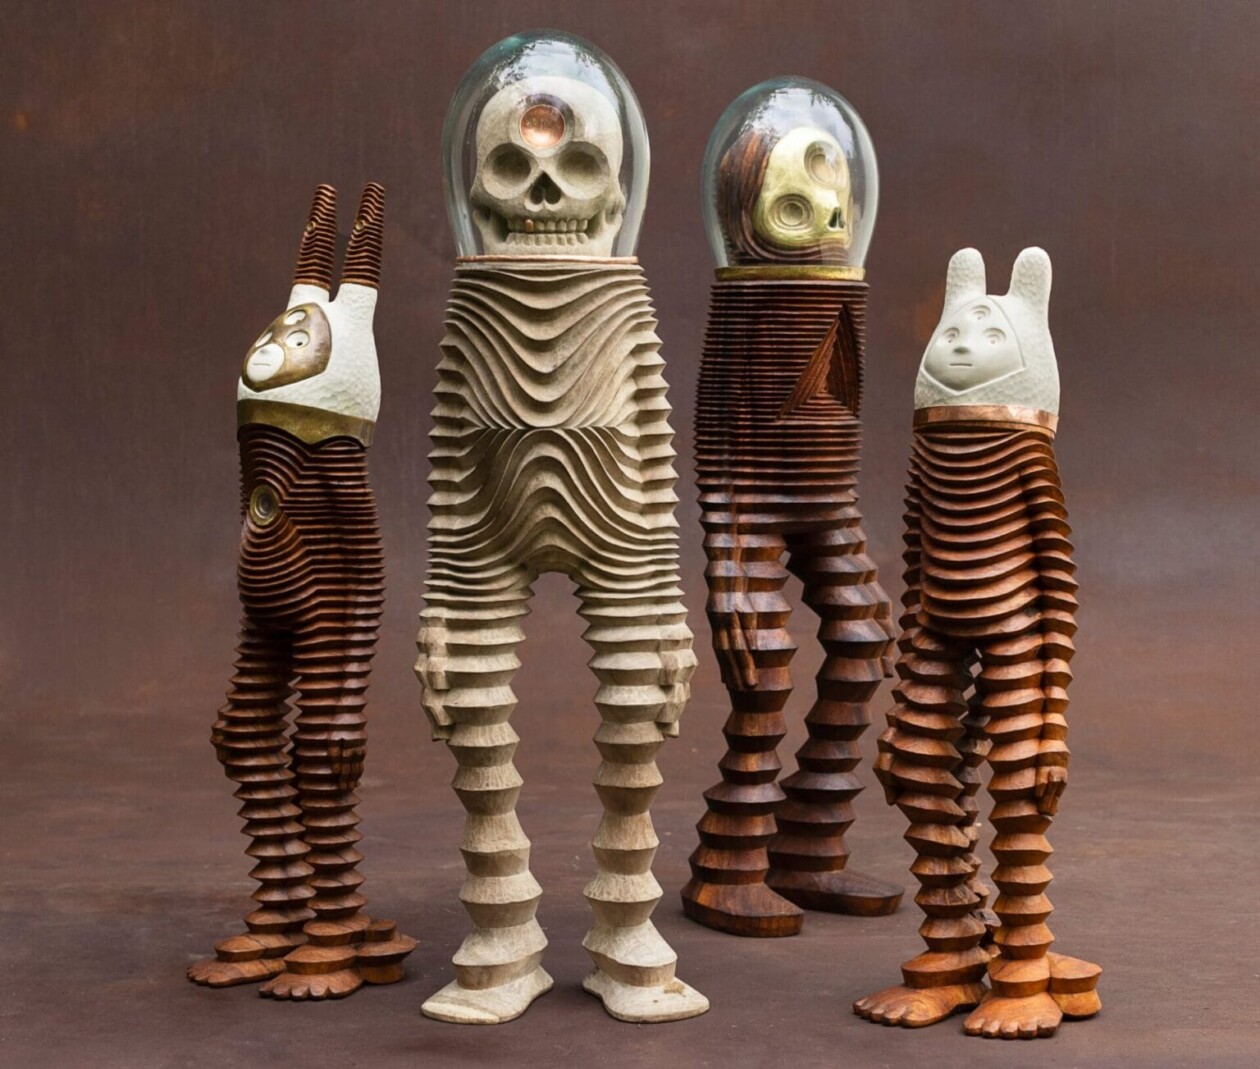 Intriguing Wood Sculptures Of Unearthly Creatures By Spencer Hansen (5)